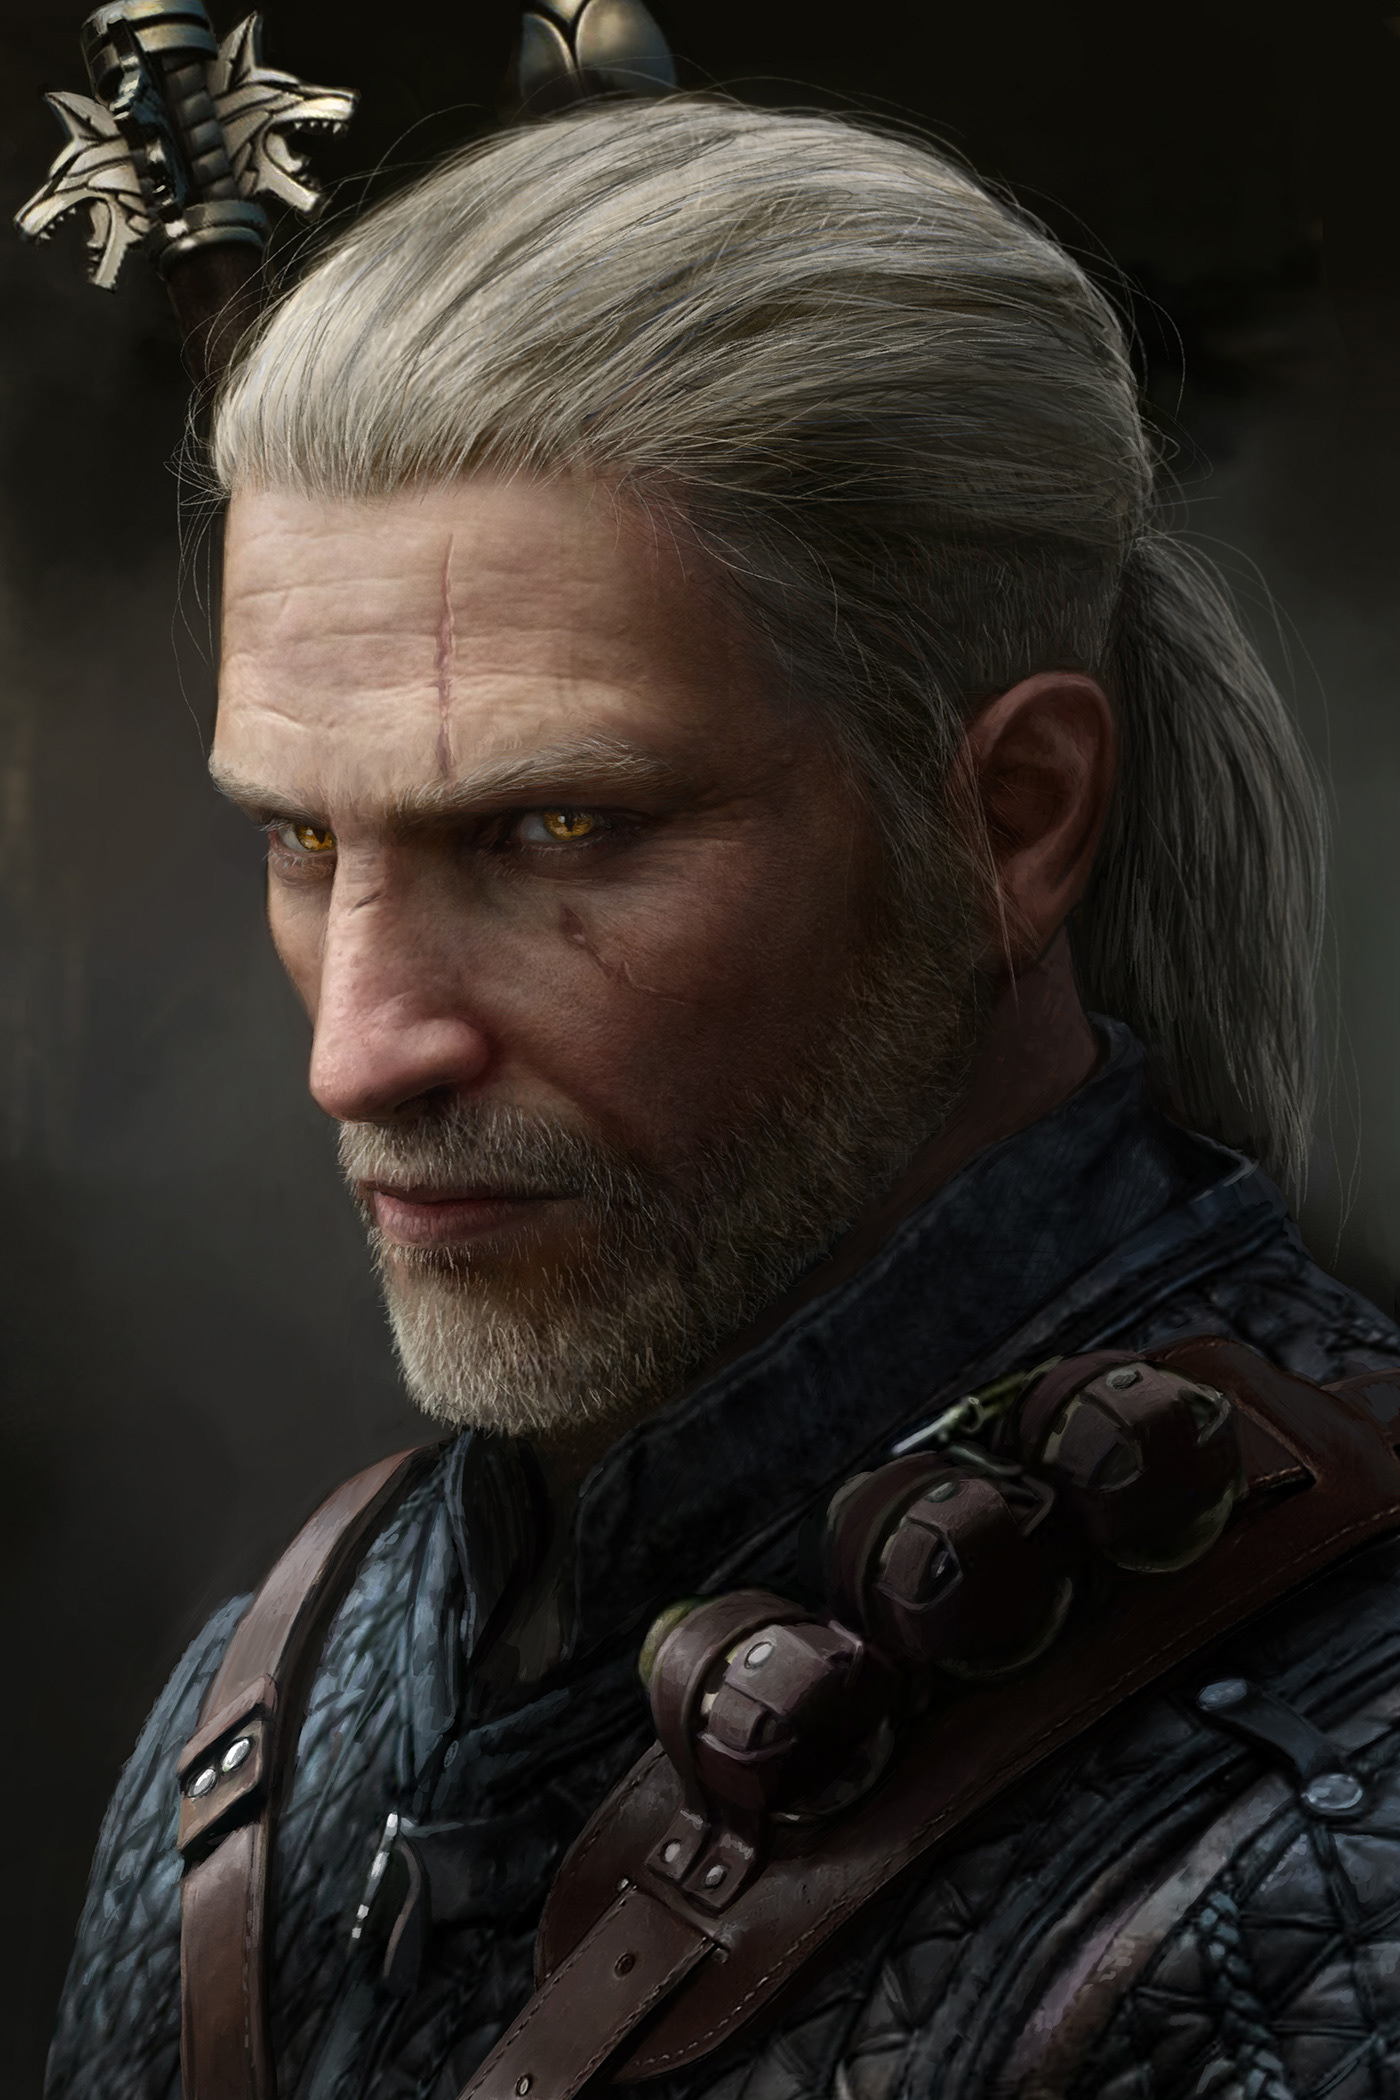 Witcher 3 portraits on Behance